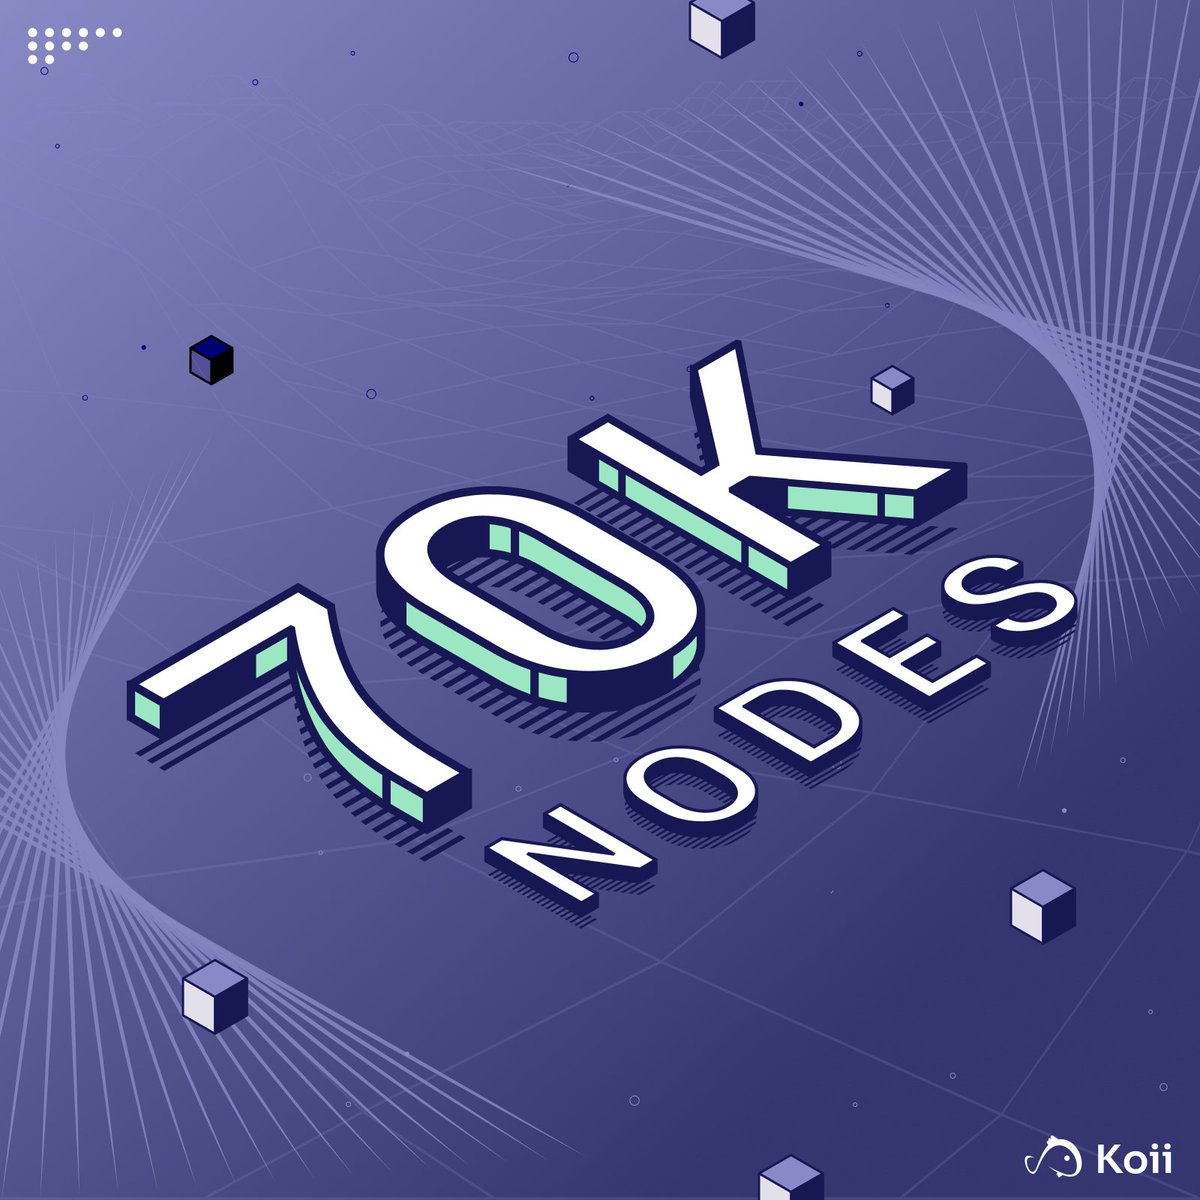 Koii has surged past 70,000 nodes on its network 🚀 Through Koii's growing compute marketplace, companies can access the compute capacity they require without investing in costly hardware infrastructure.